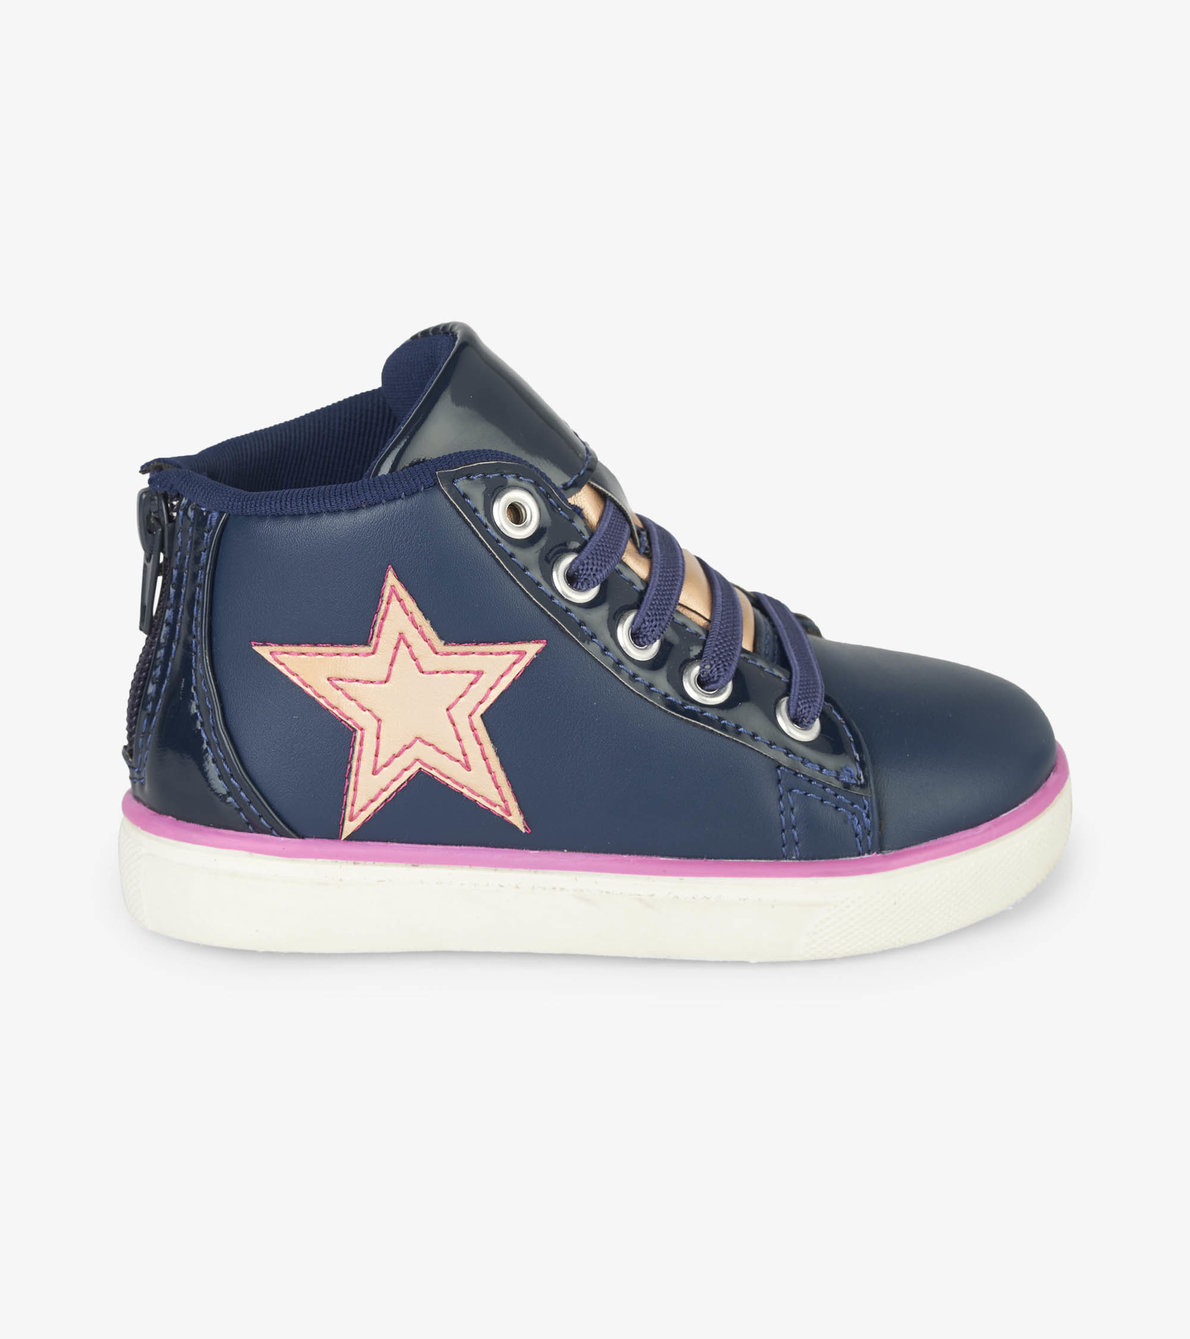 View larger image of Shining Star High Top Sneaker